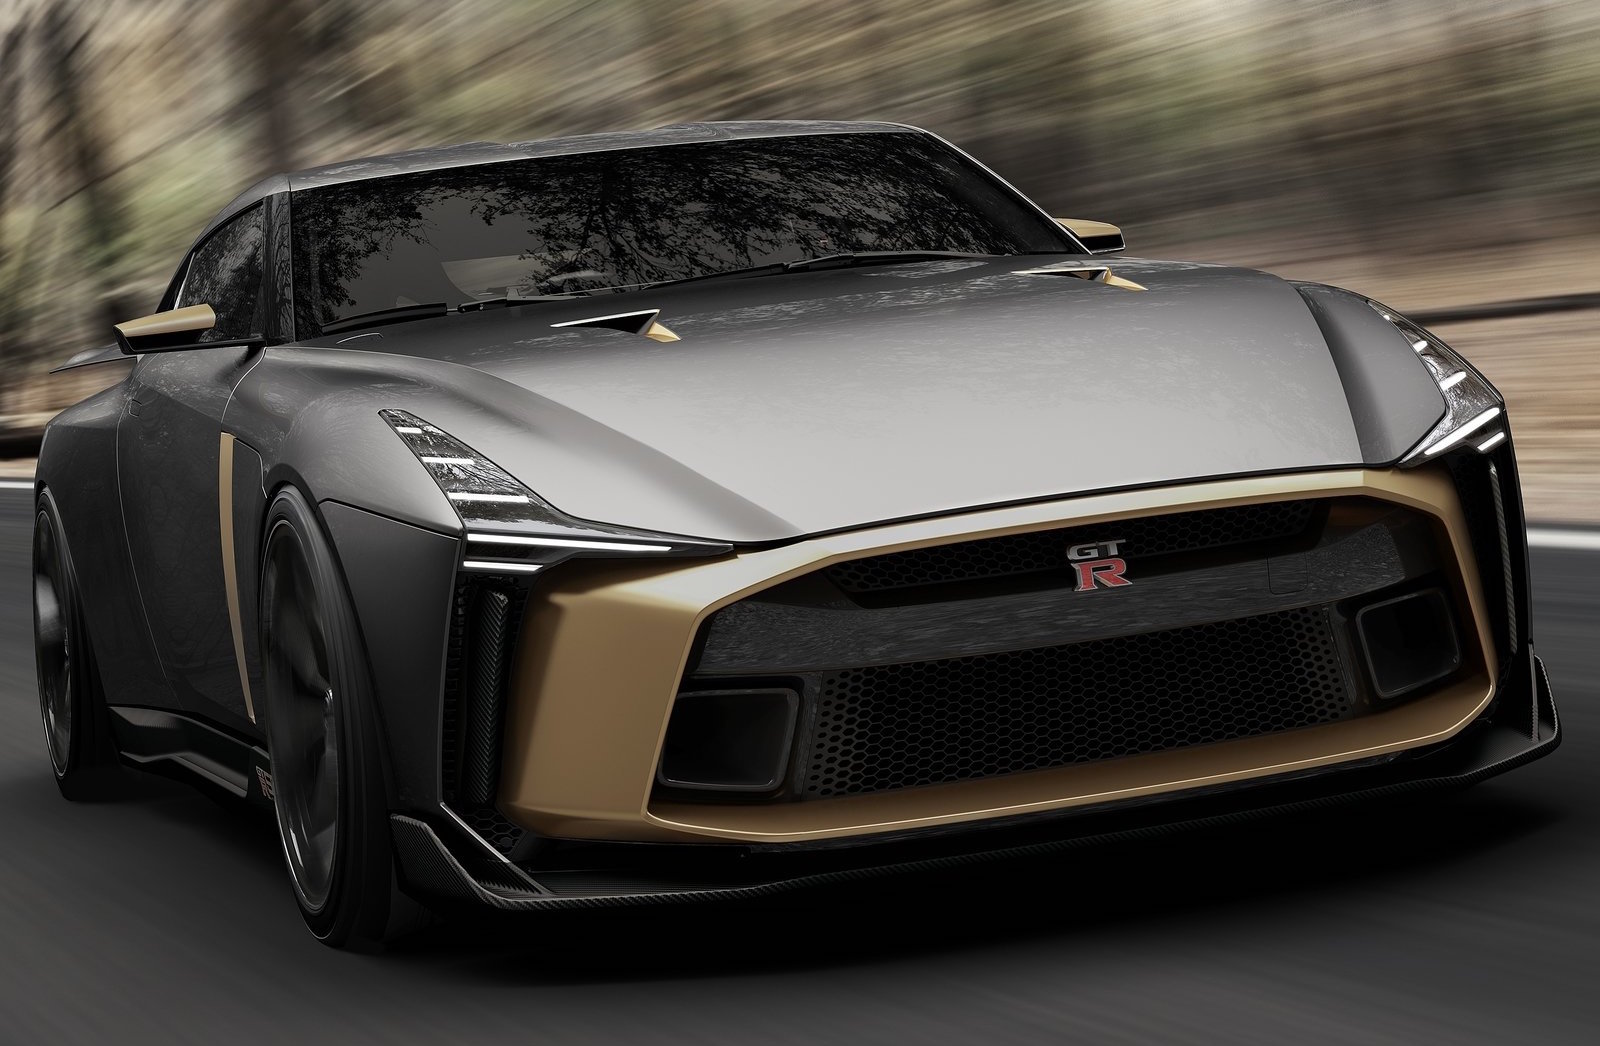 R36 Nissan Gt R To Be Fastest Super Sports Car In The World Report Performancedrive